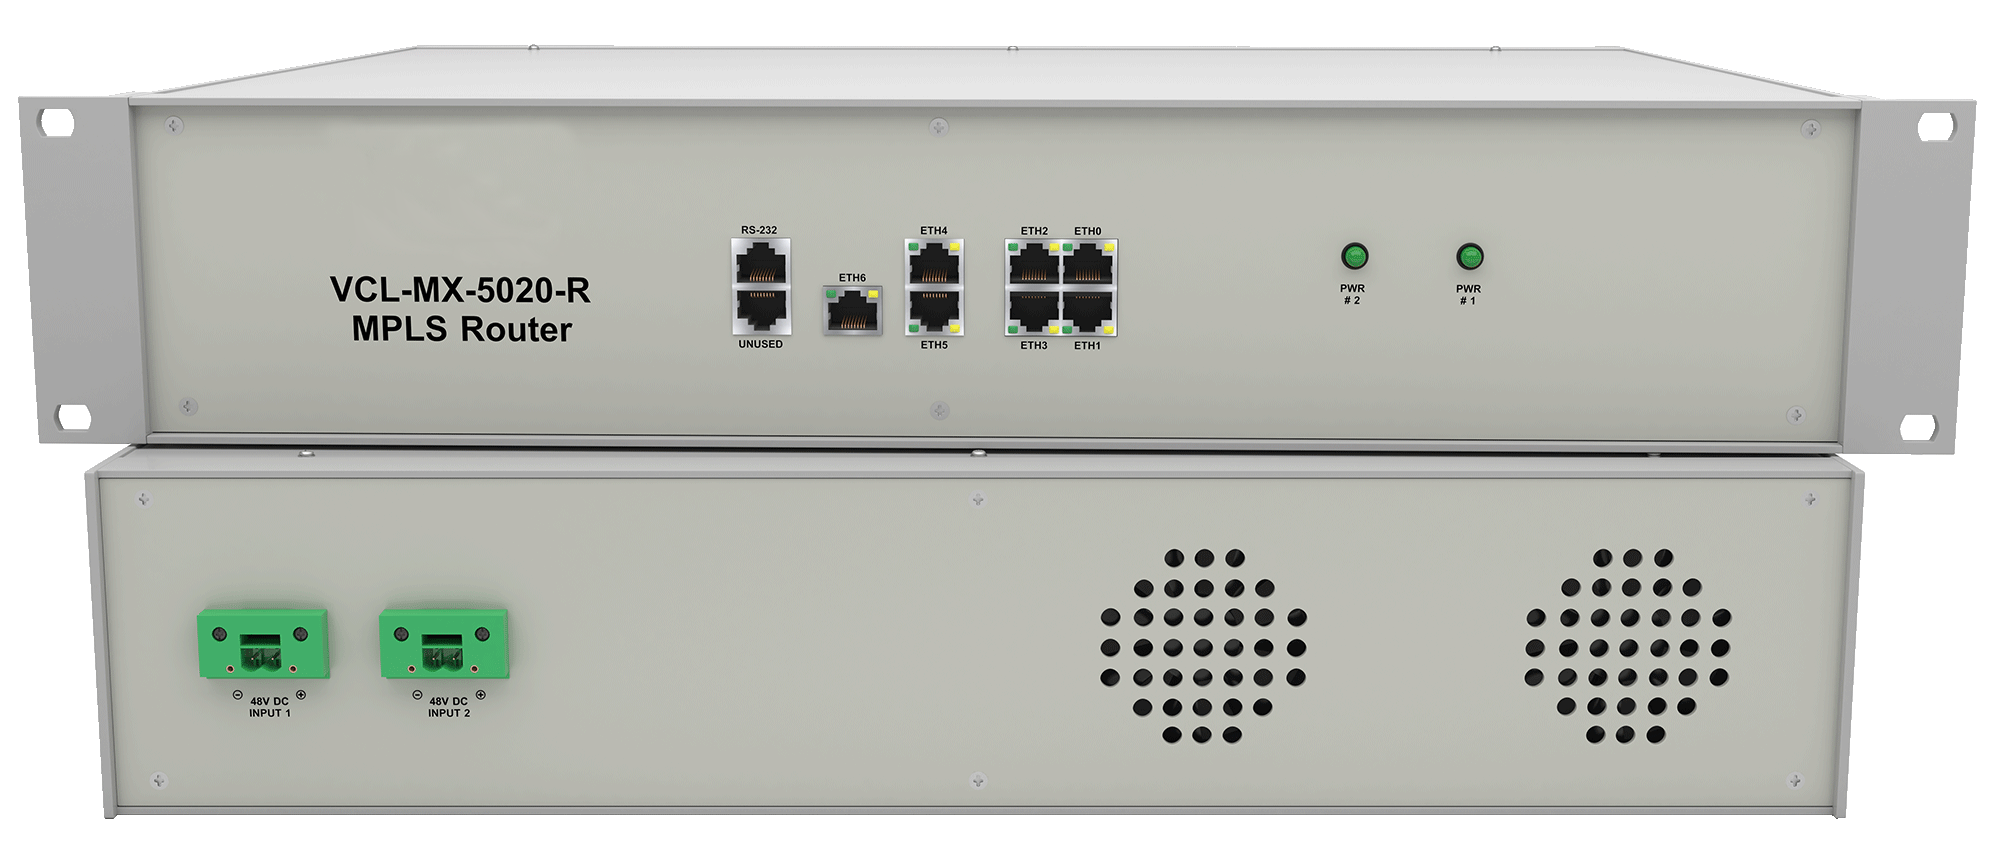 VCL-MX-5020-R IP/MPLS Router